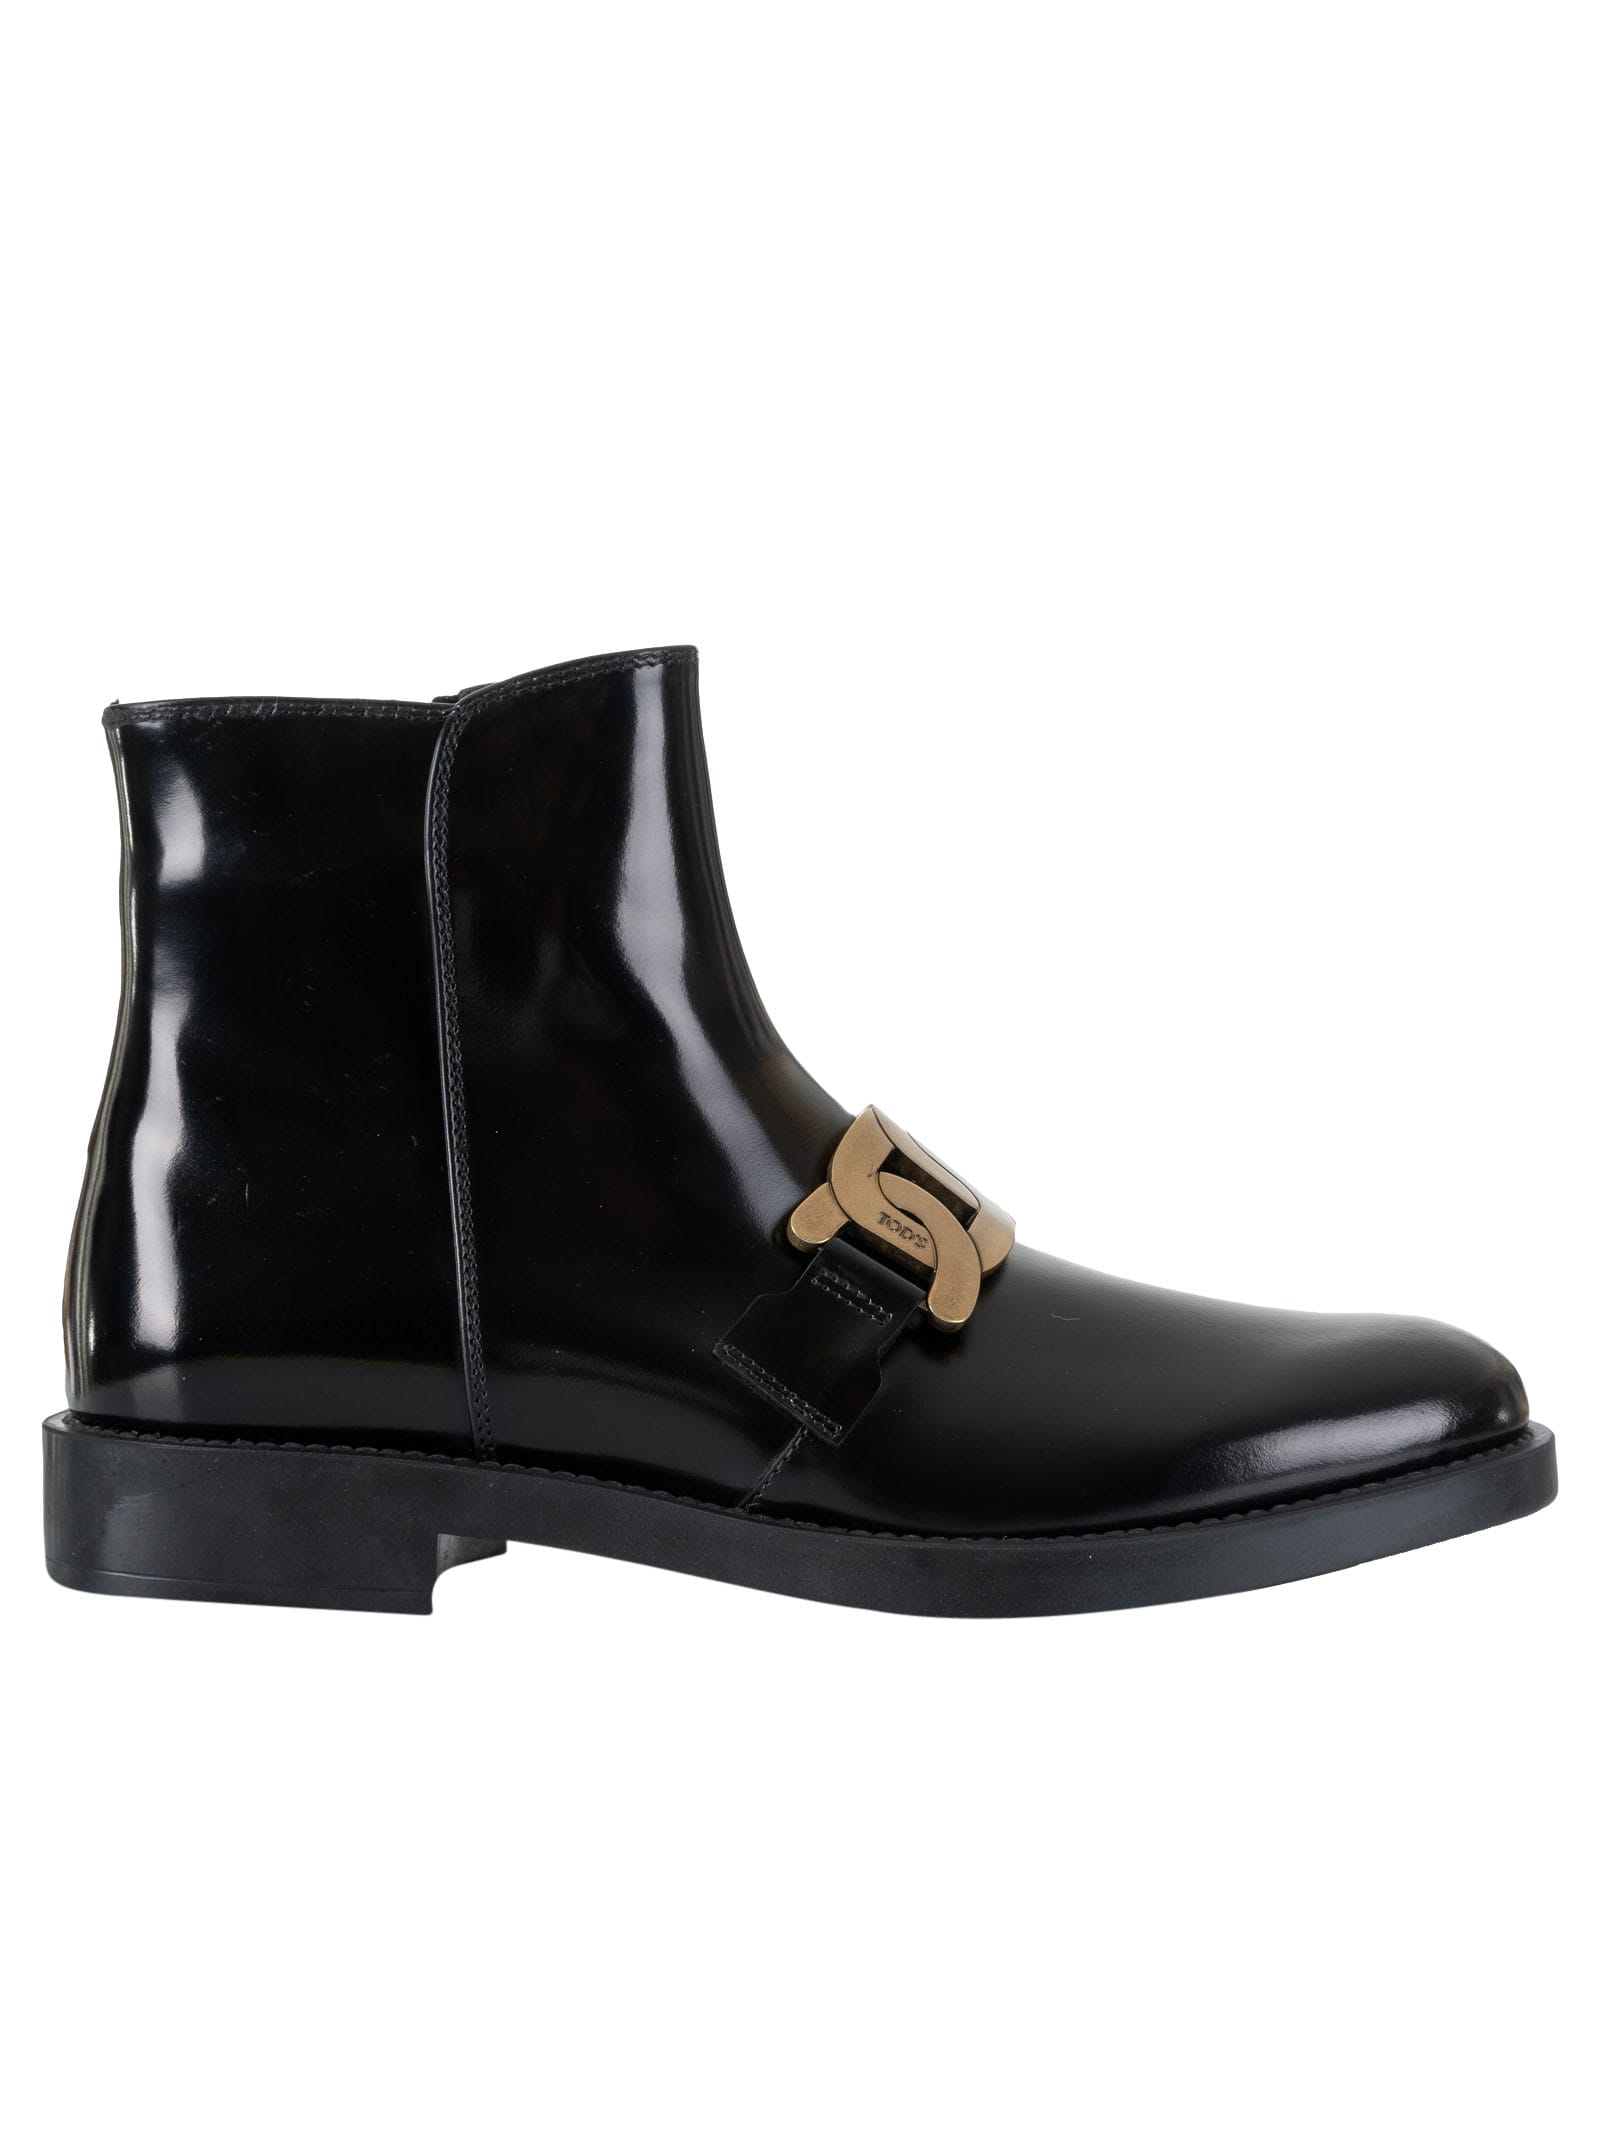 Buy Tods Catena Boots online, shop Tods shoes with free shipping